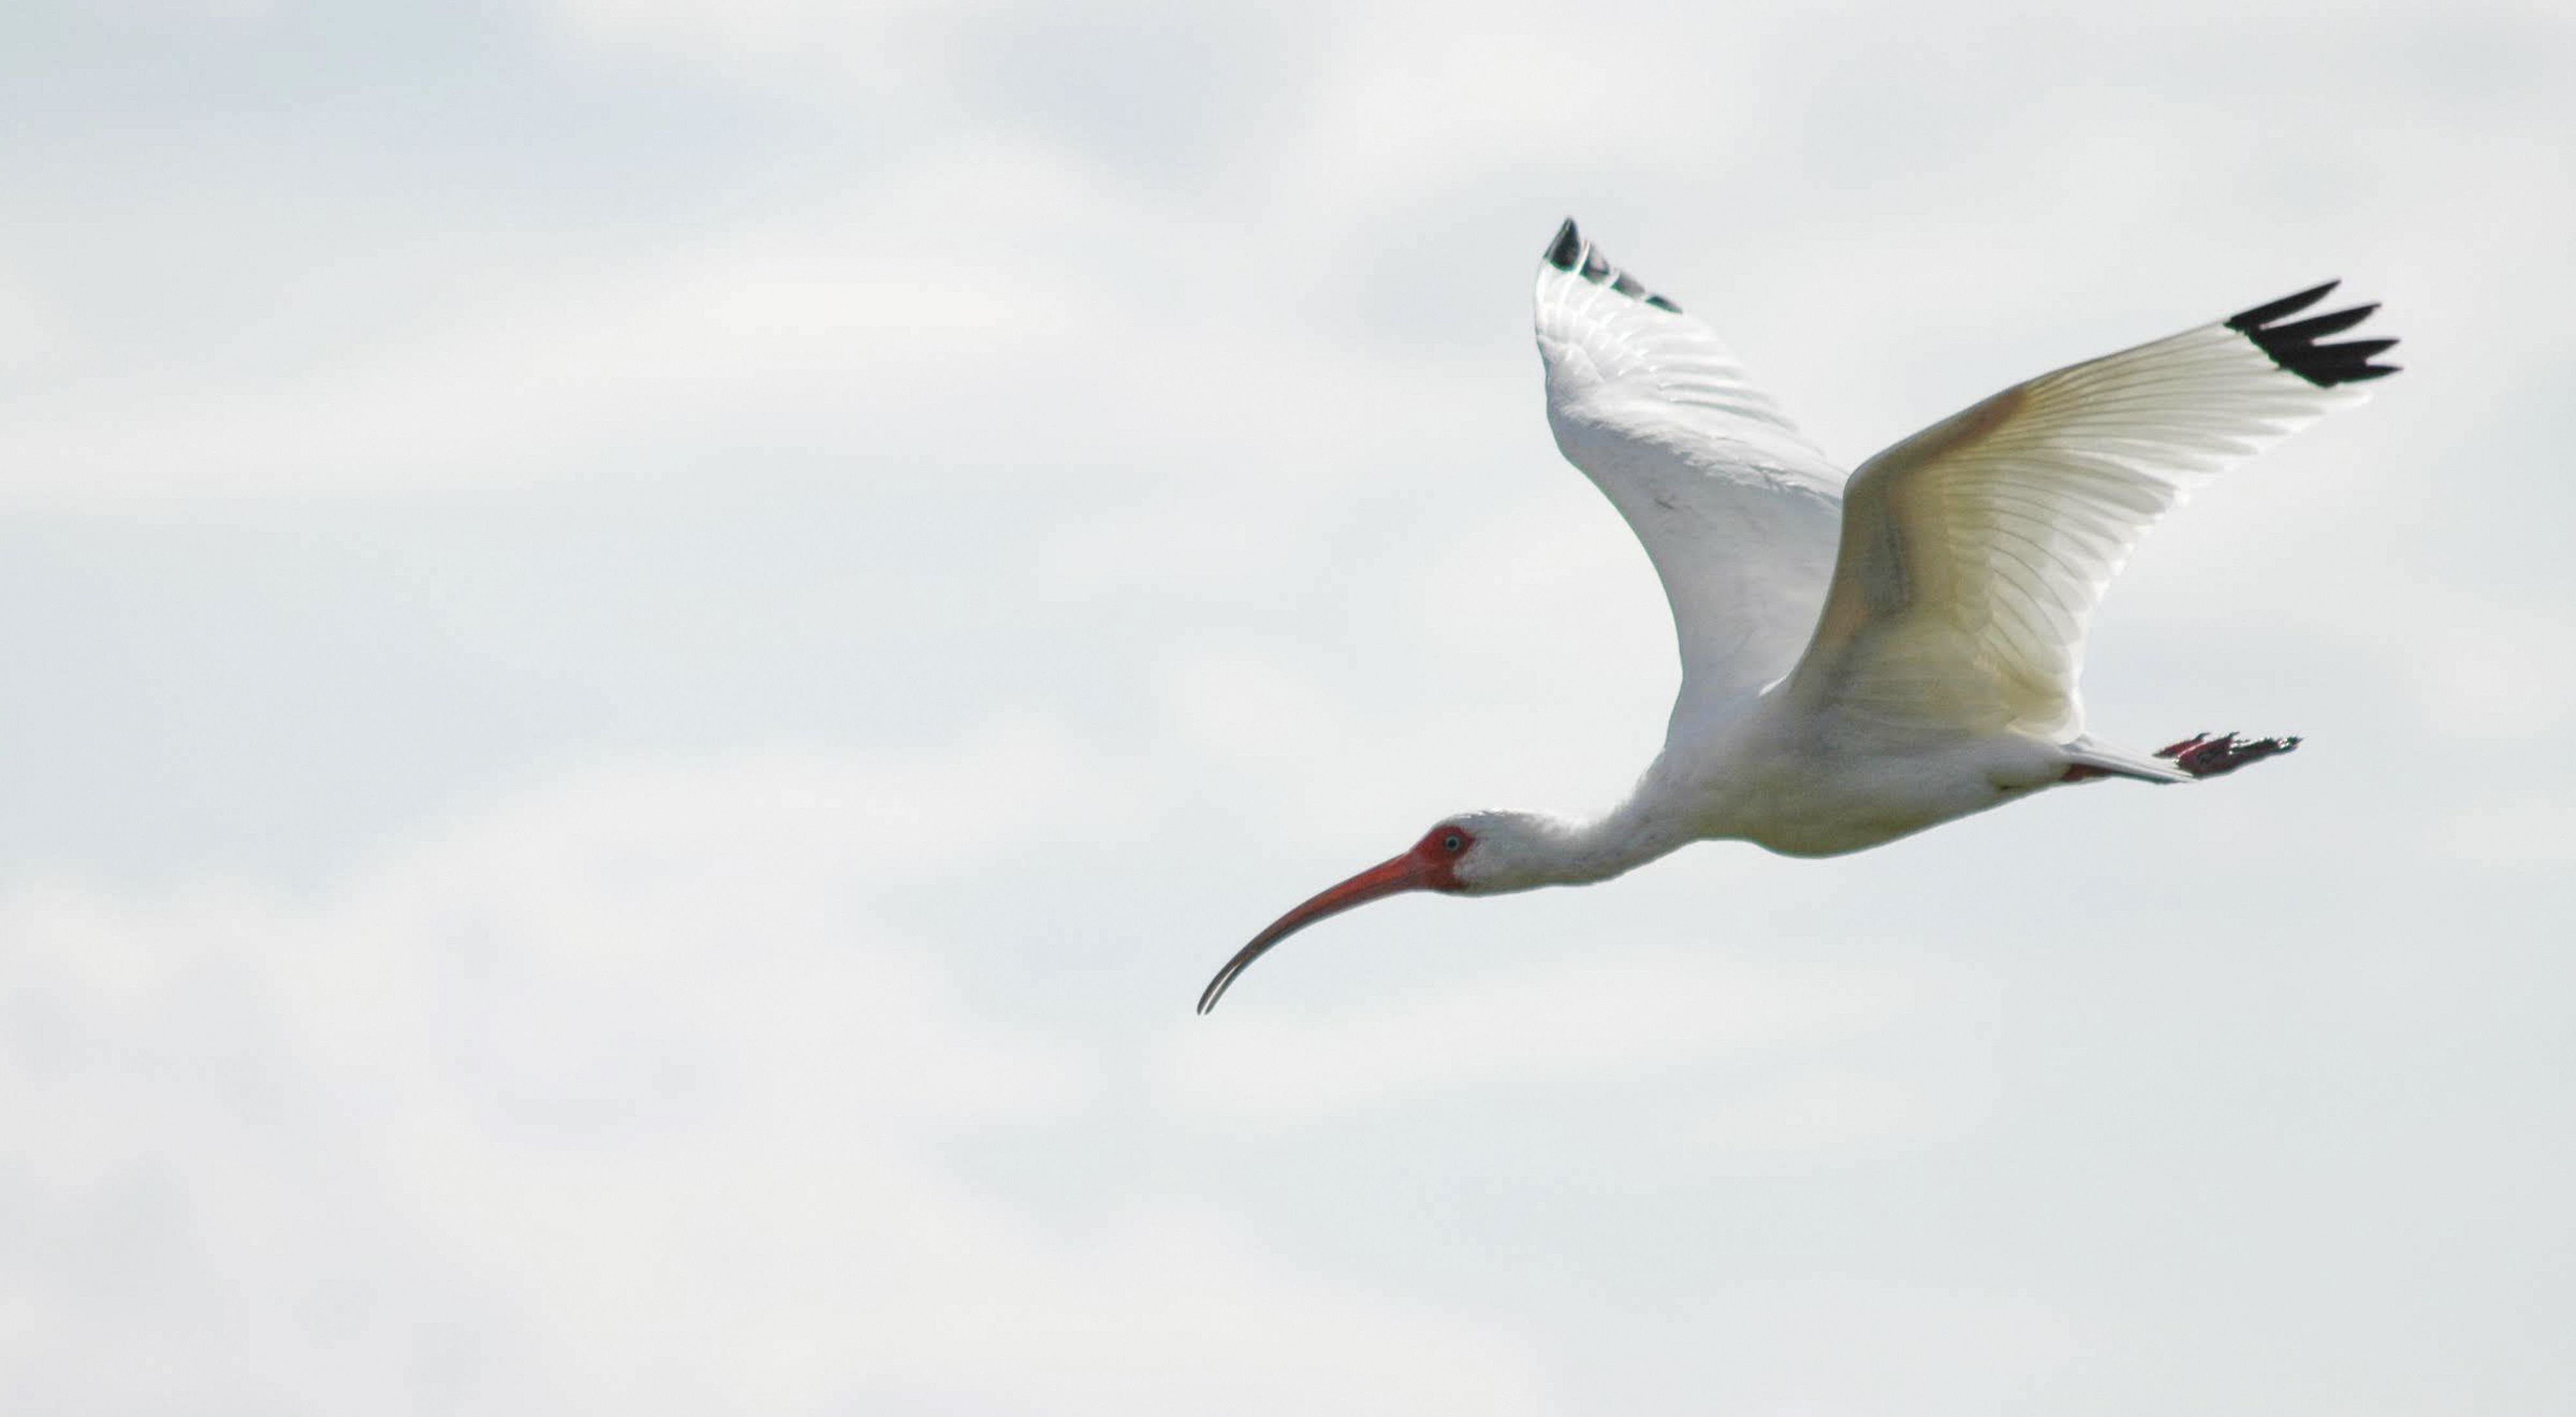 A large white bird with black wing tips and a red face, flying through a blueish gray sky.